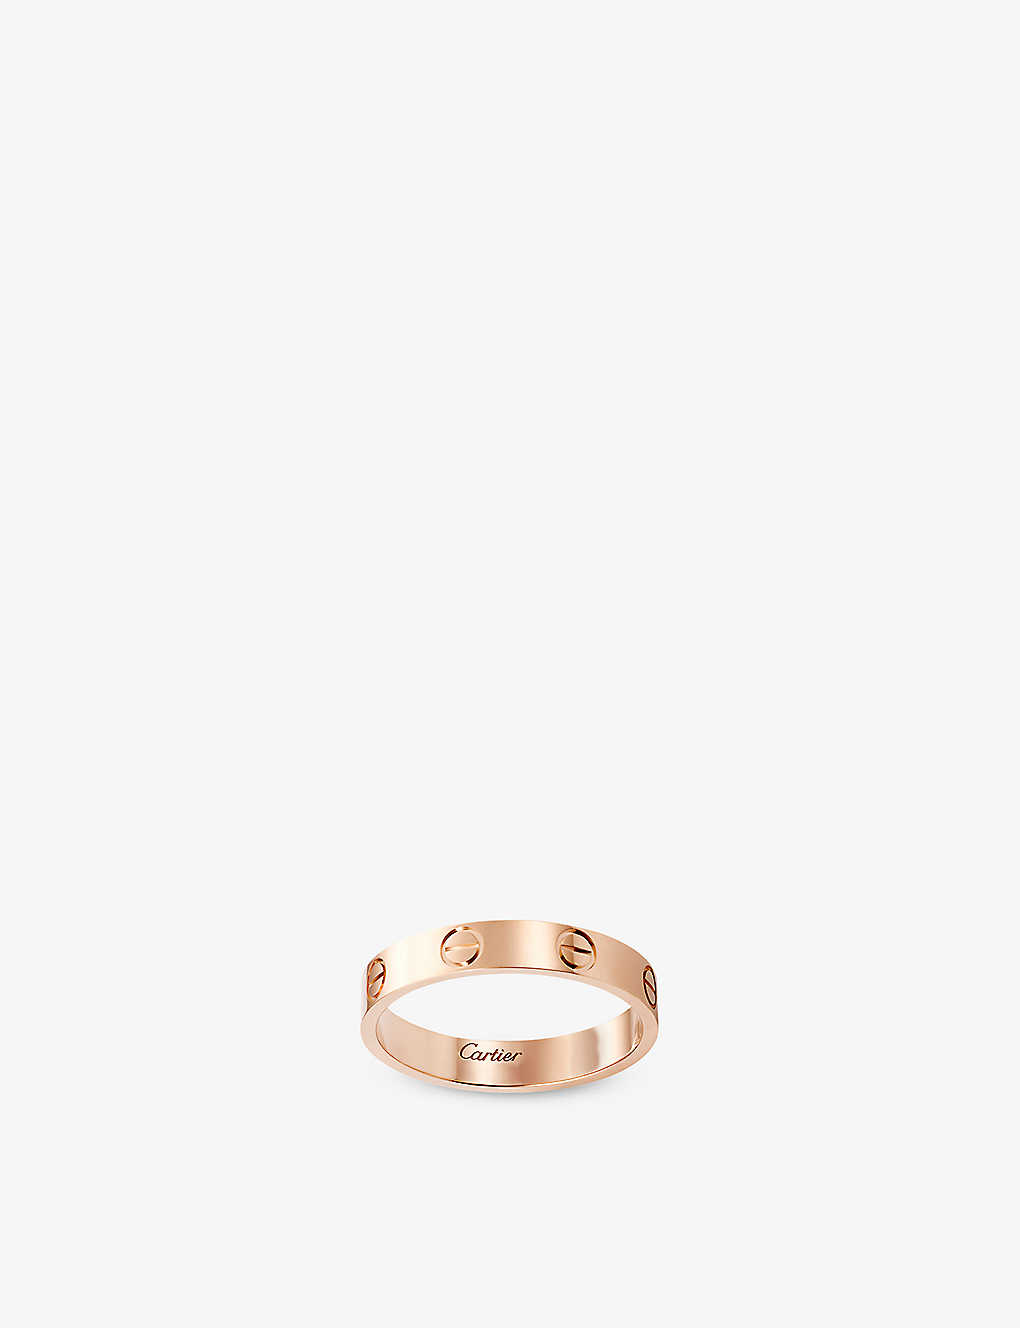 Rose gold Cartier Love ring